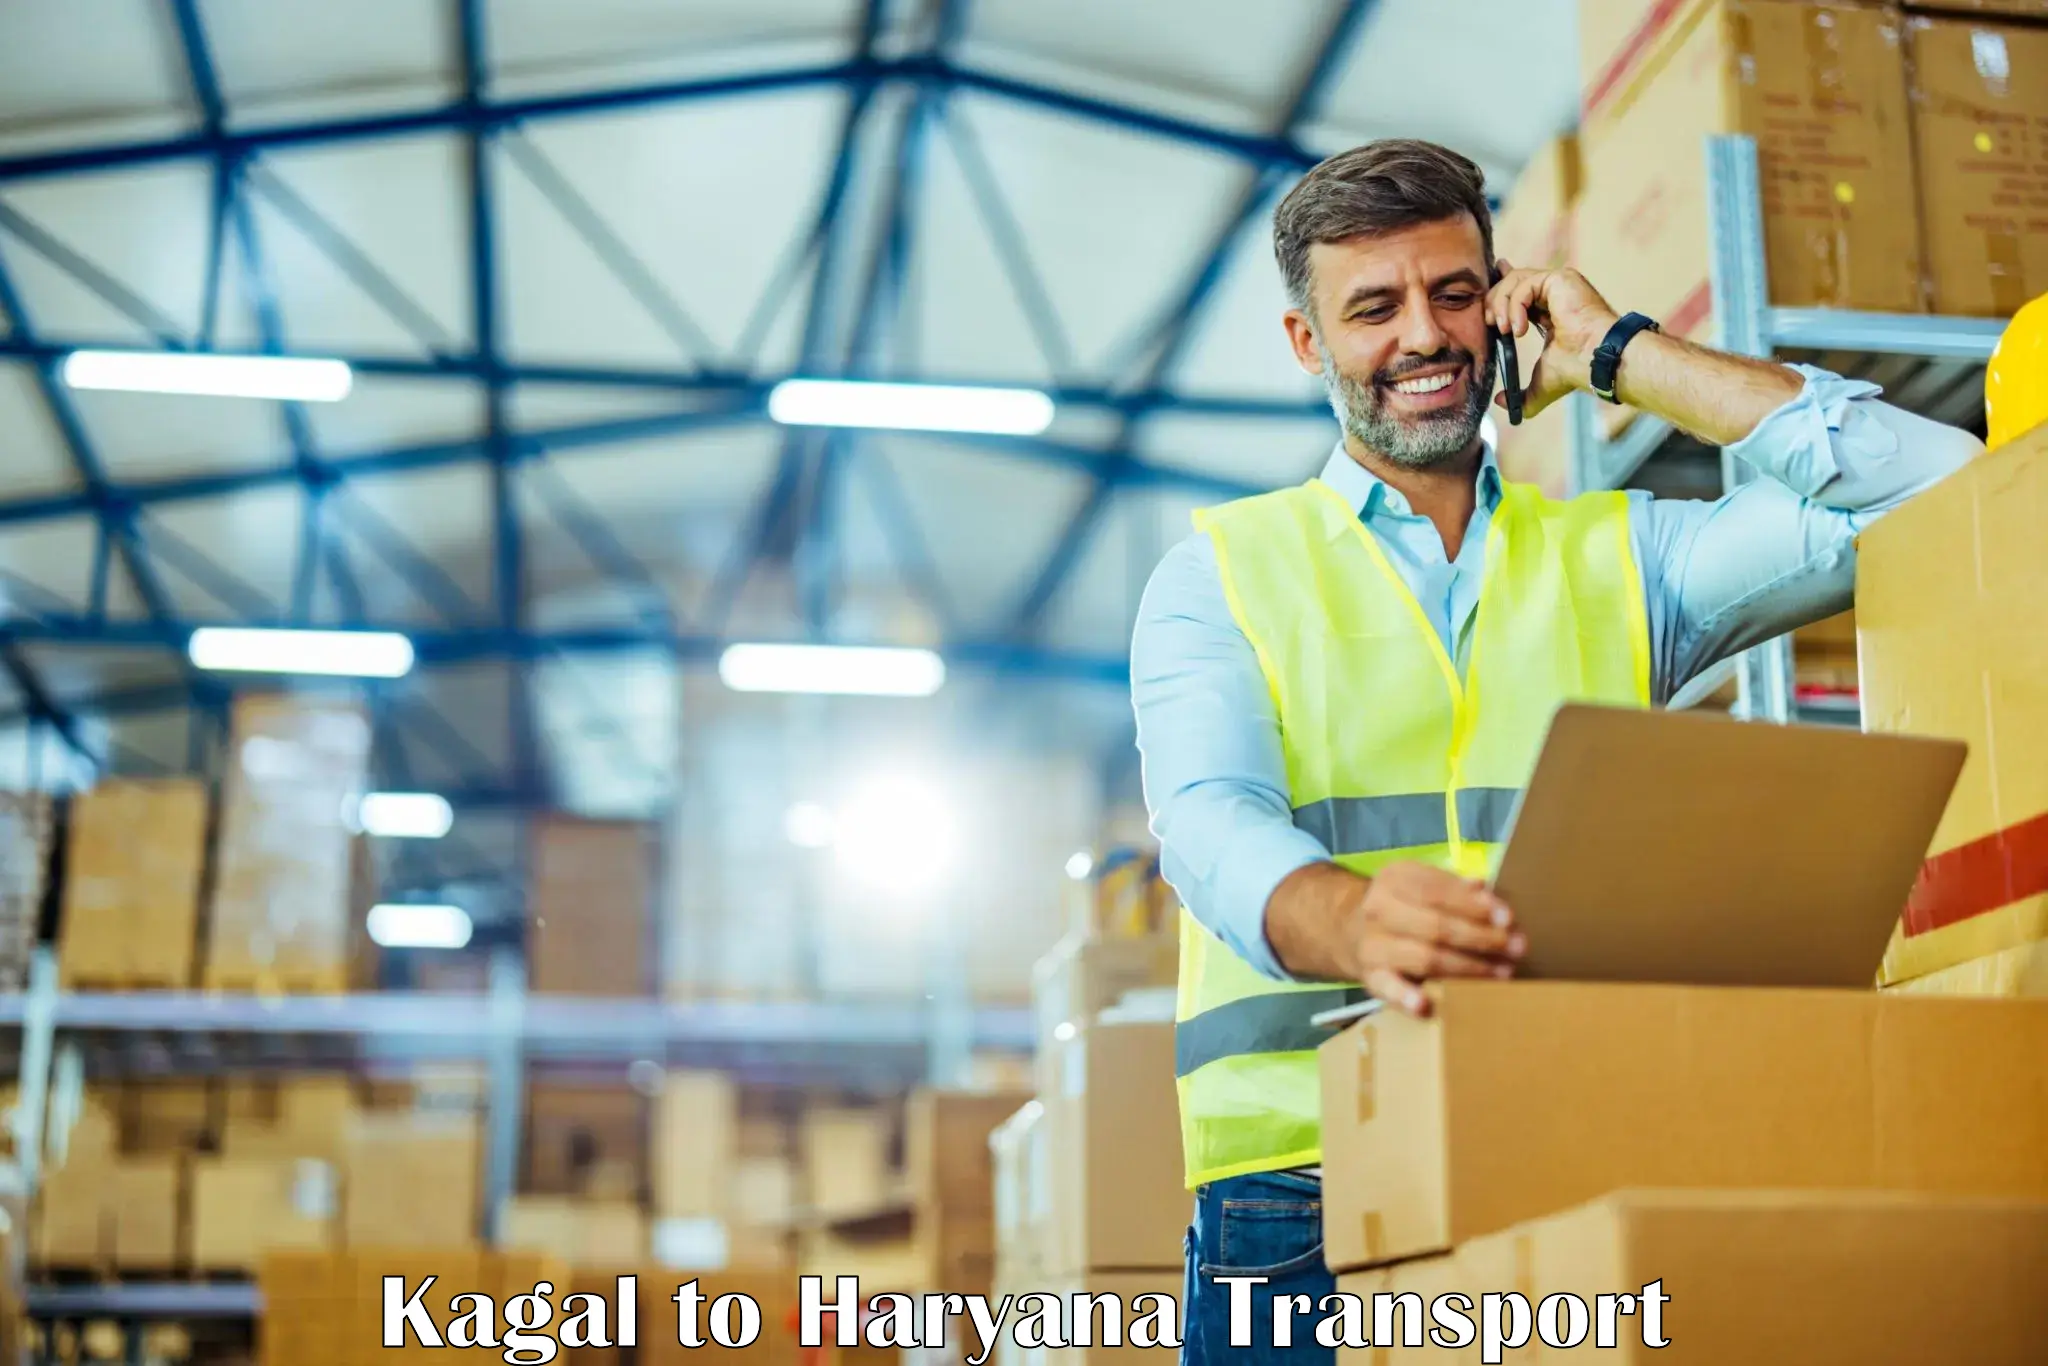 Container transport service Kagal to Haryana